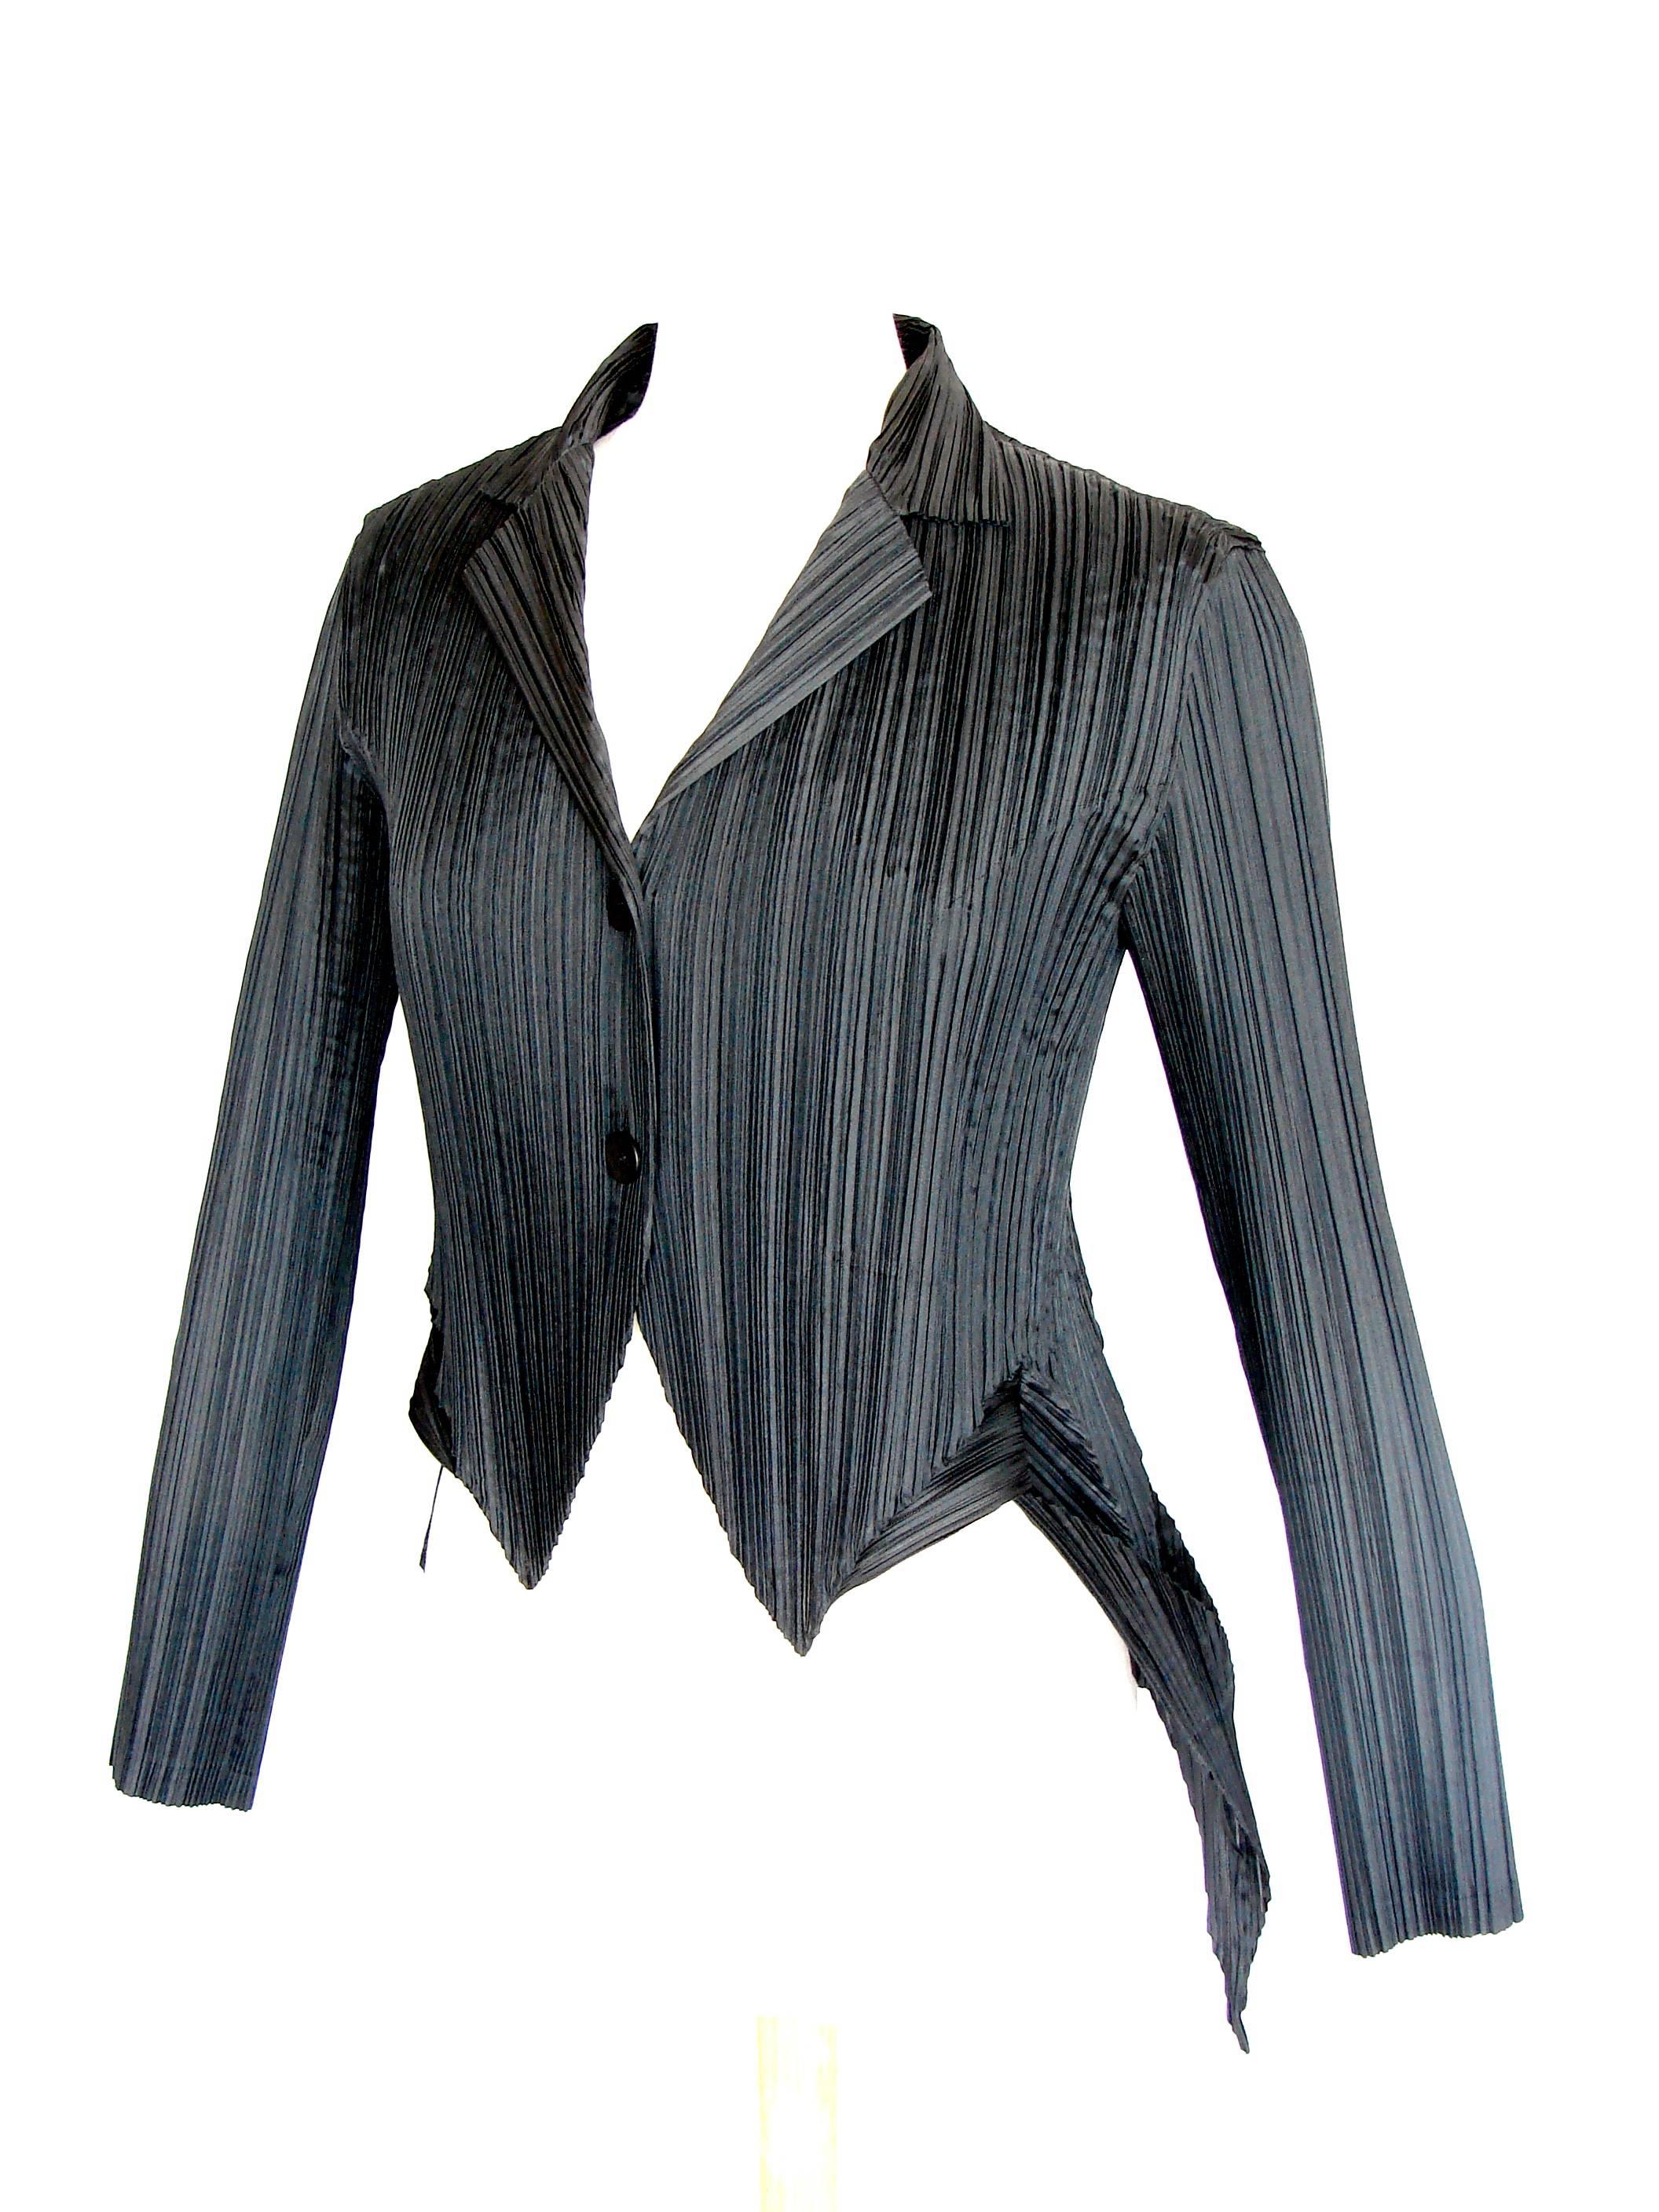 Issey Miyake Black Pleated Jacket with Pointed Tails Architectural Sz 3 2